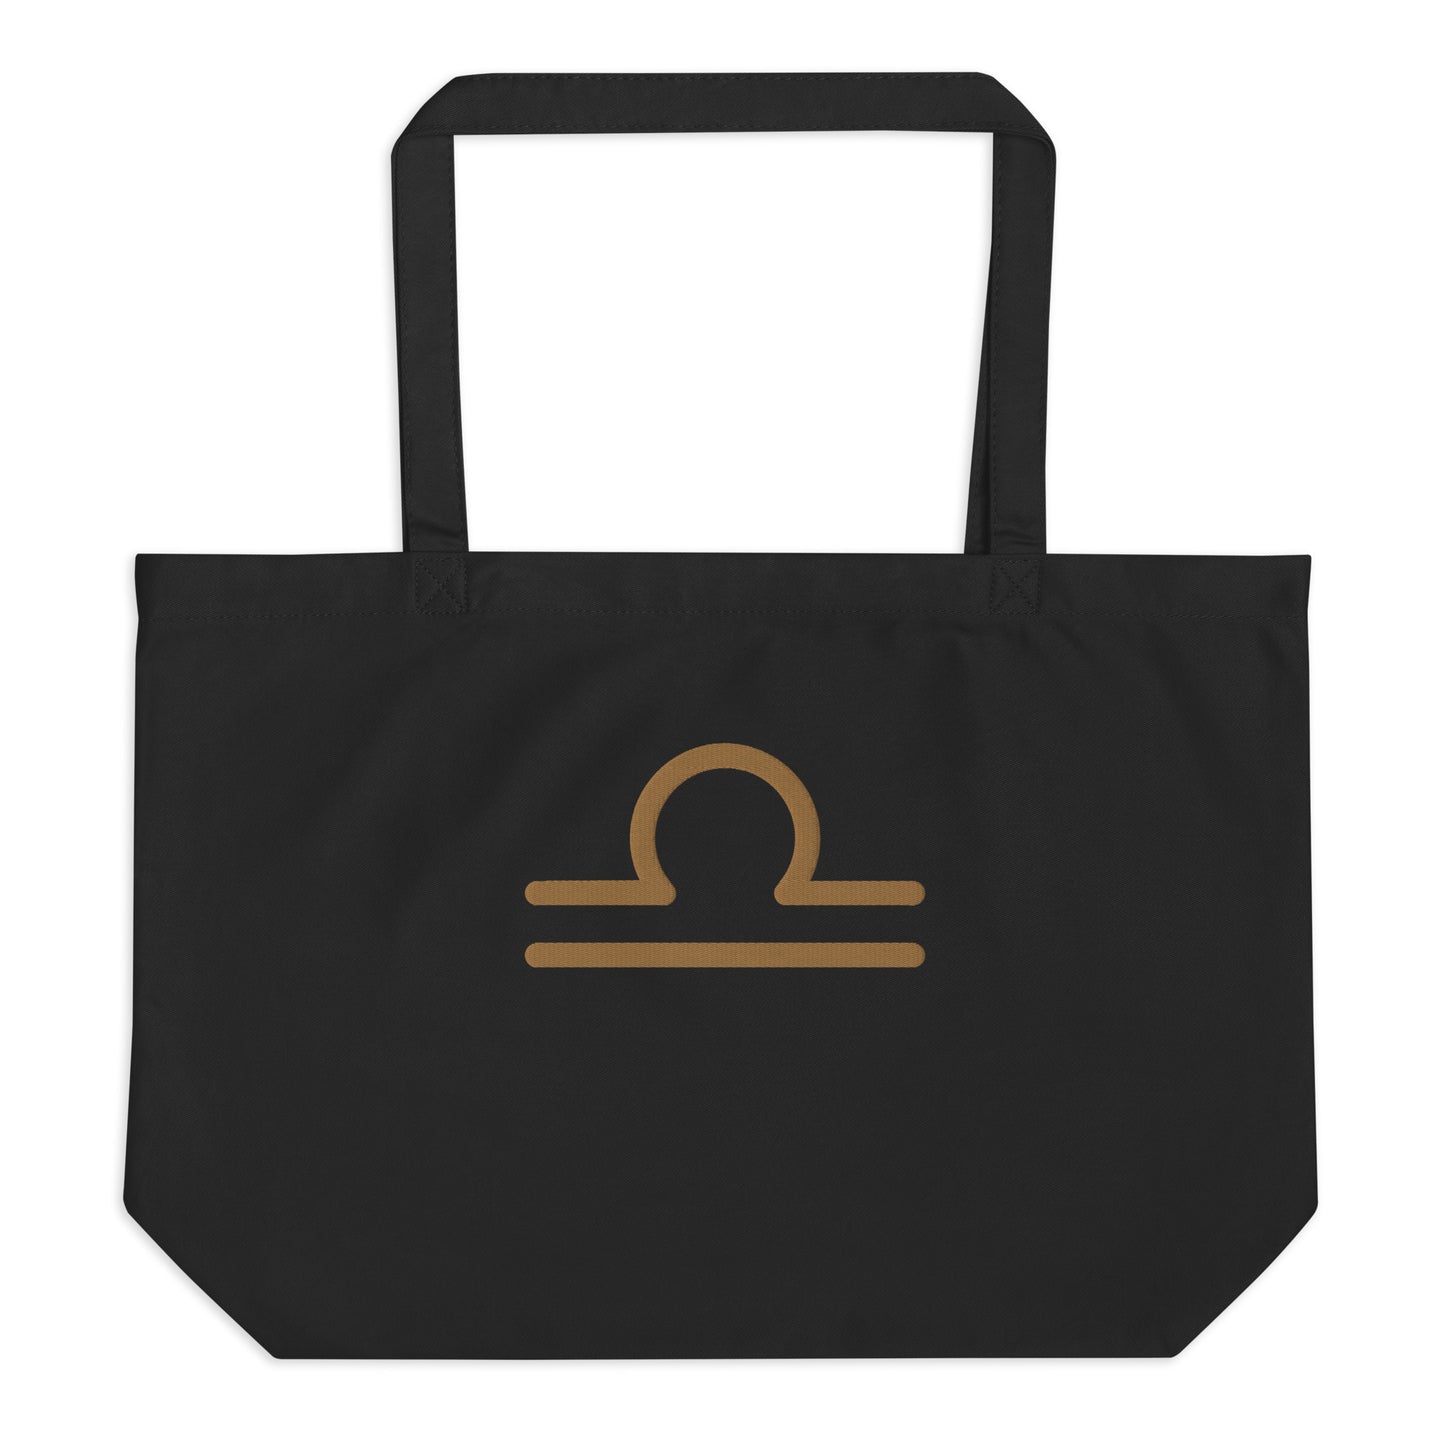 Libra - Large Open Tote Bag - Gold Thread